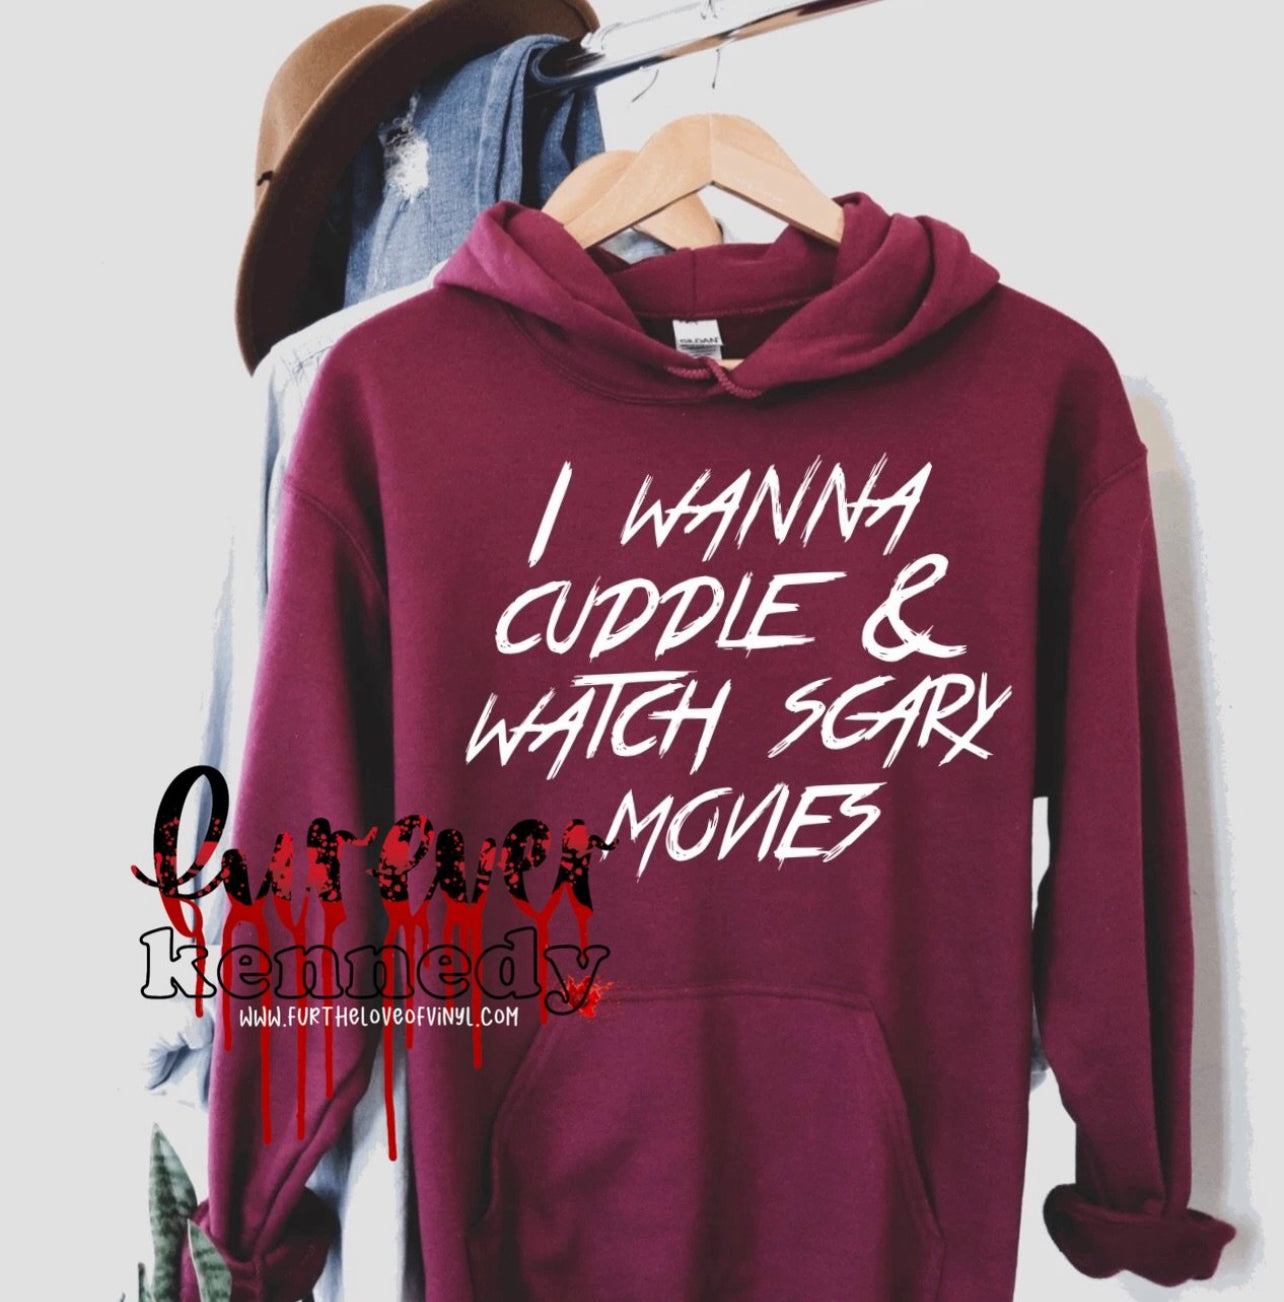 (MTO) Apparel: Cuddle and watch scary movies